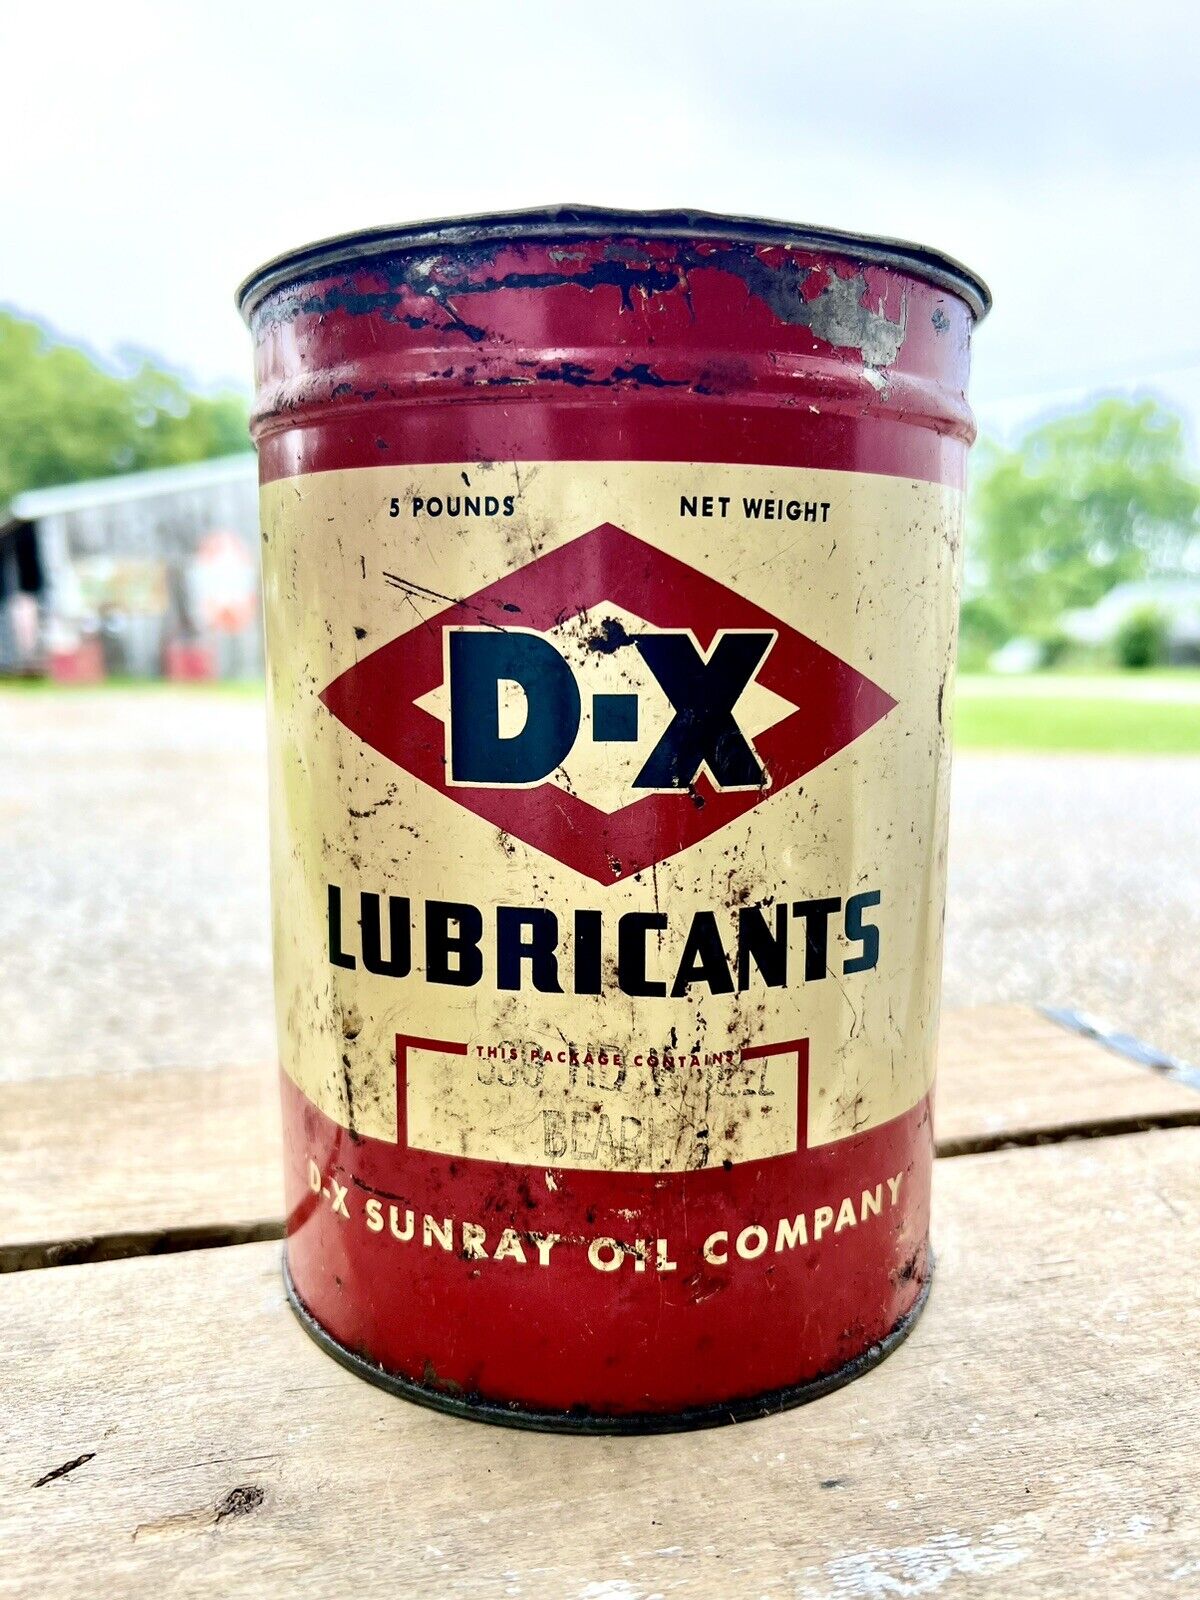 VINTAGE 1930'S DIAMOND DX 5 LB Lubricants Wheel Bearing Grease Can EMPTY